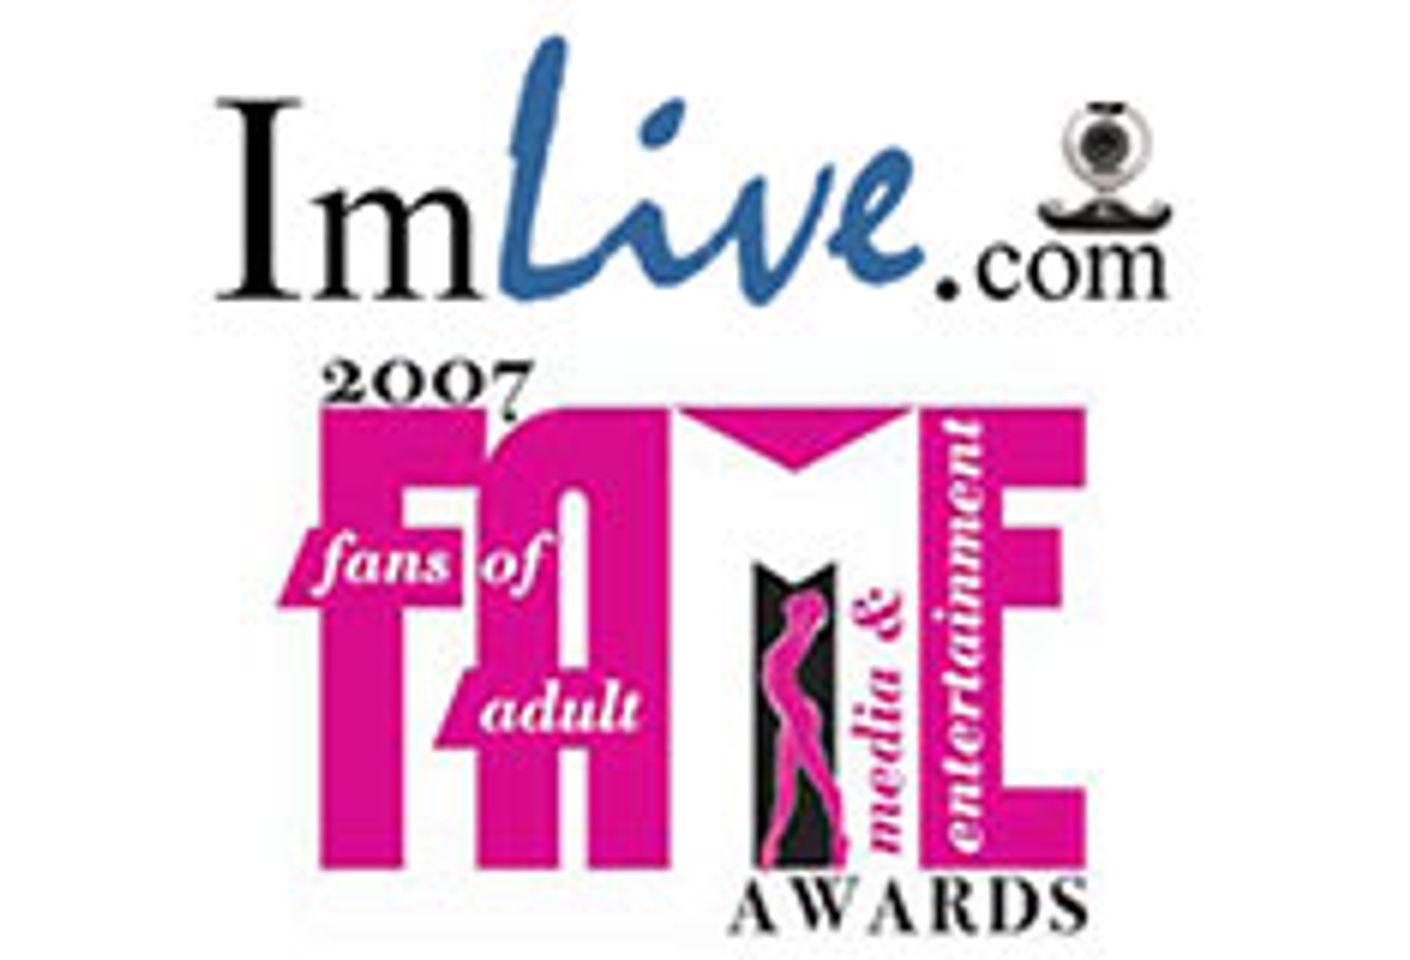 FAME Awards Teams Up with IMLive.com for Prizes, Chats and Video